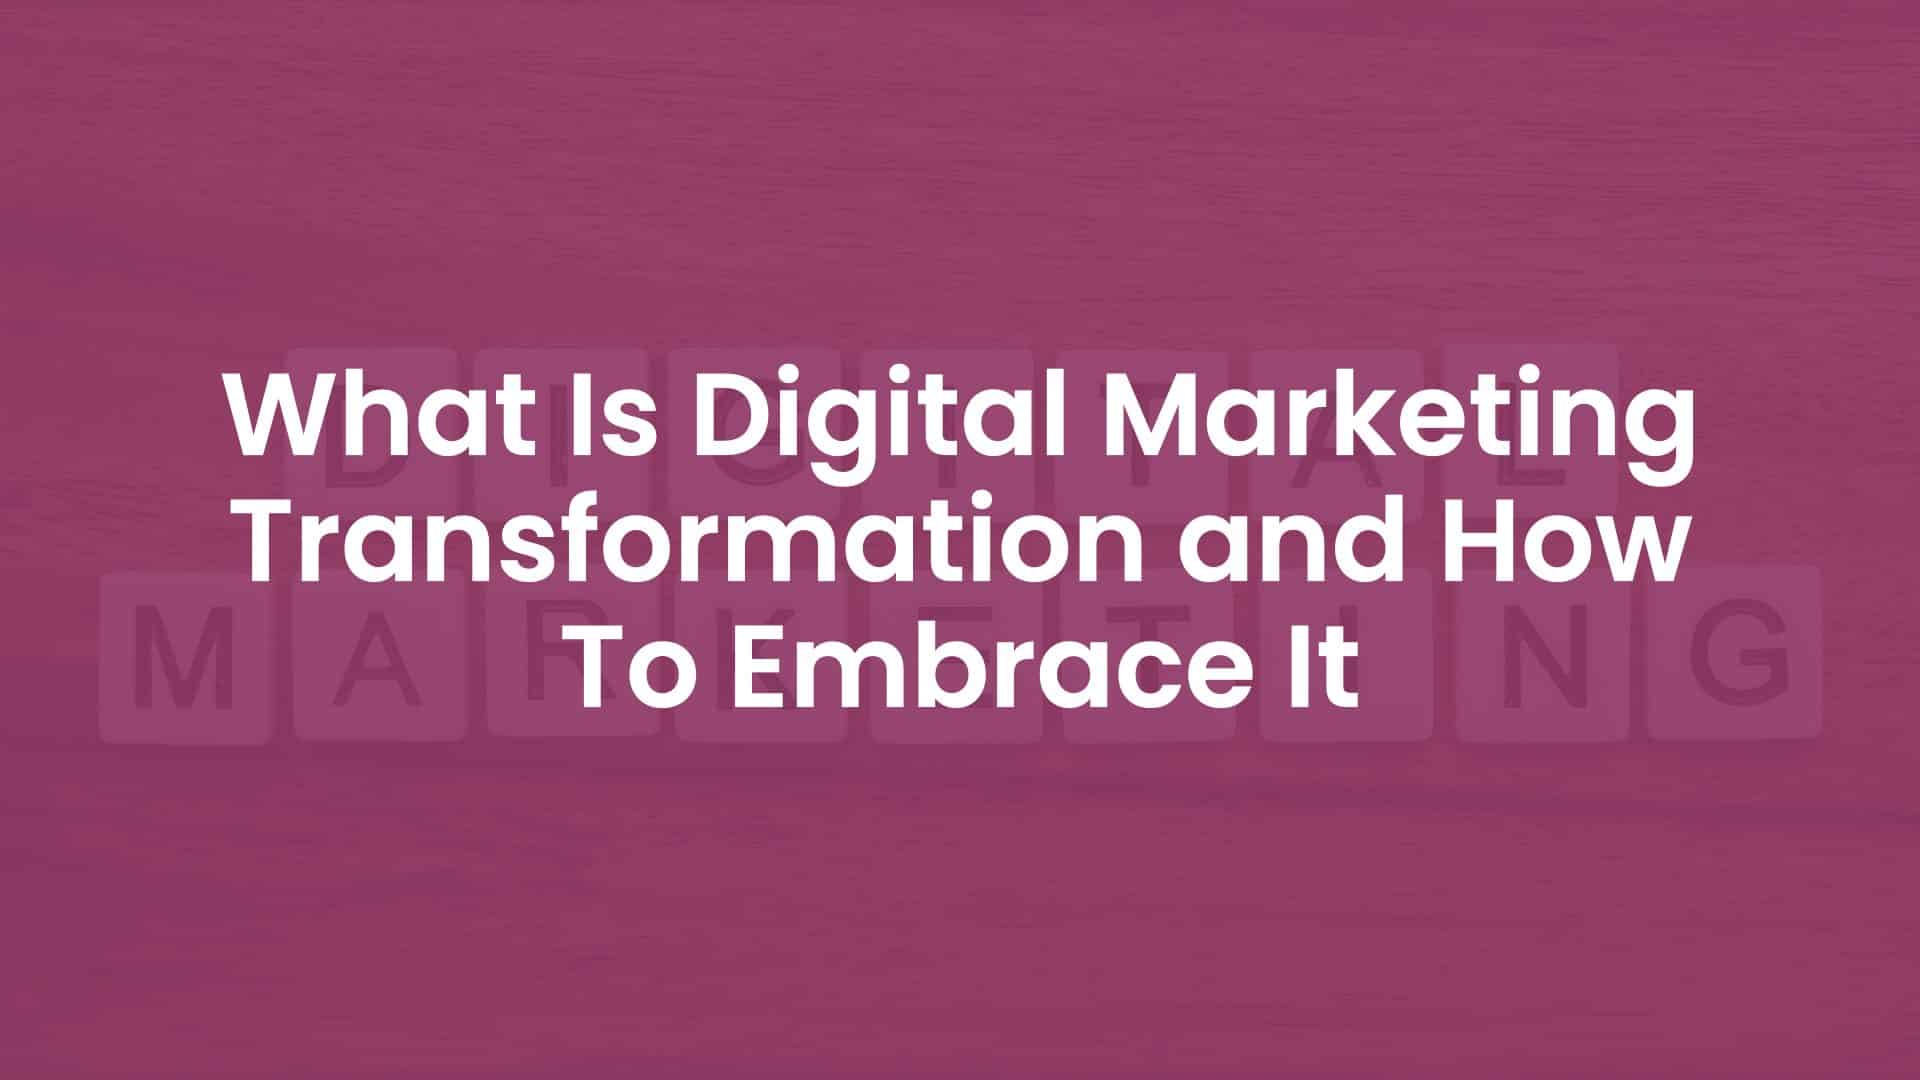 What is Digital Marketing Transformation and How to Embrace It